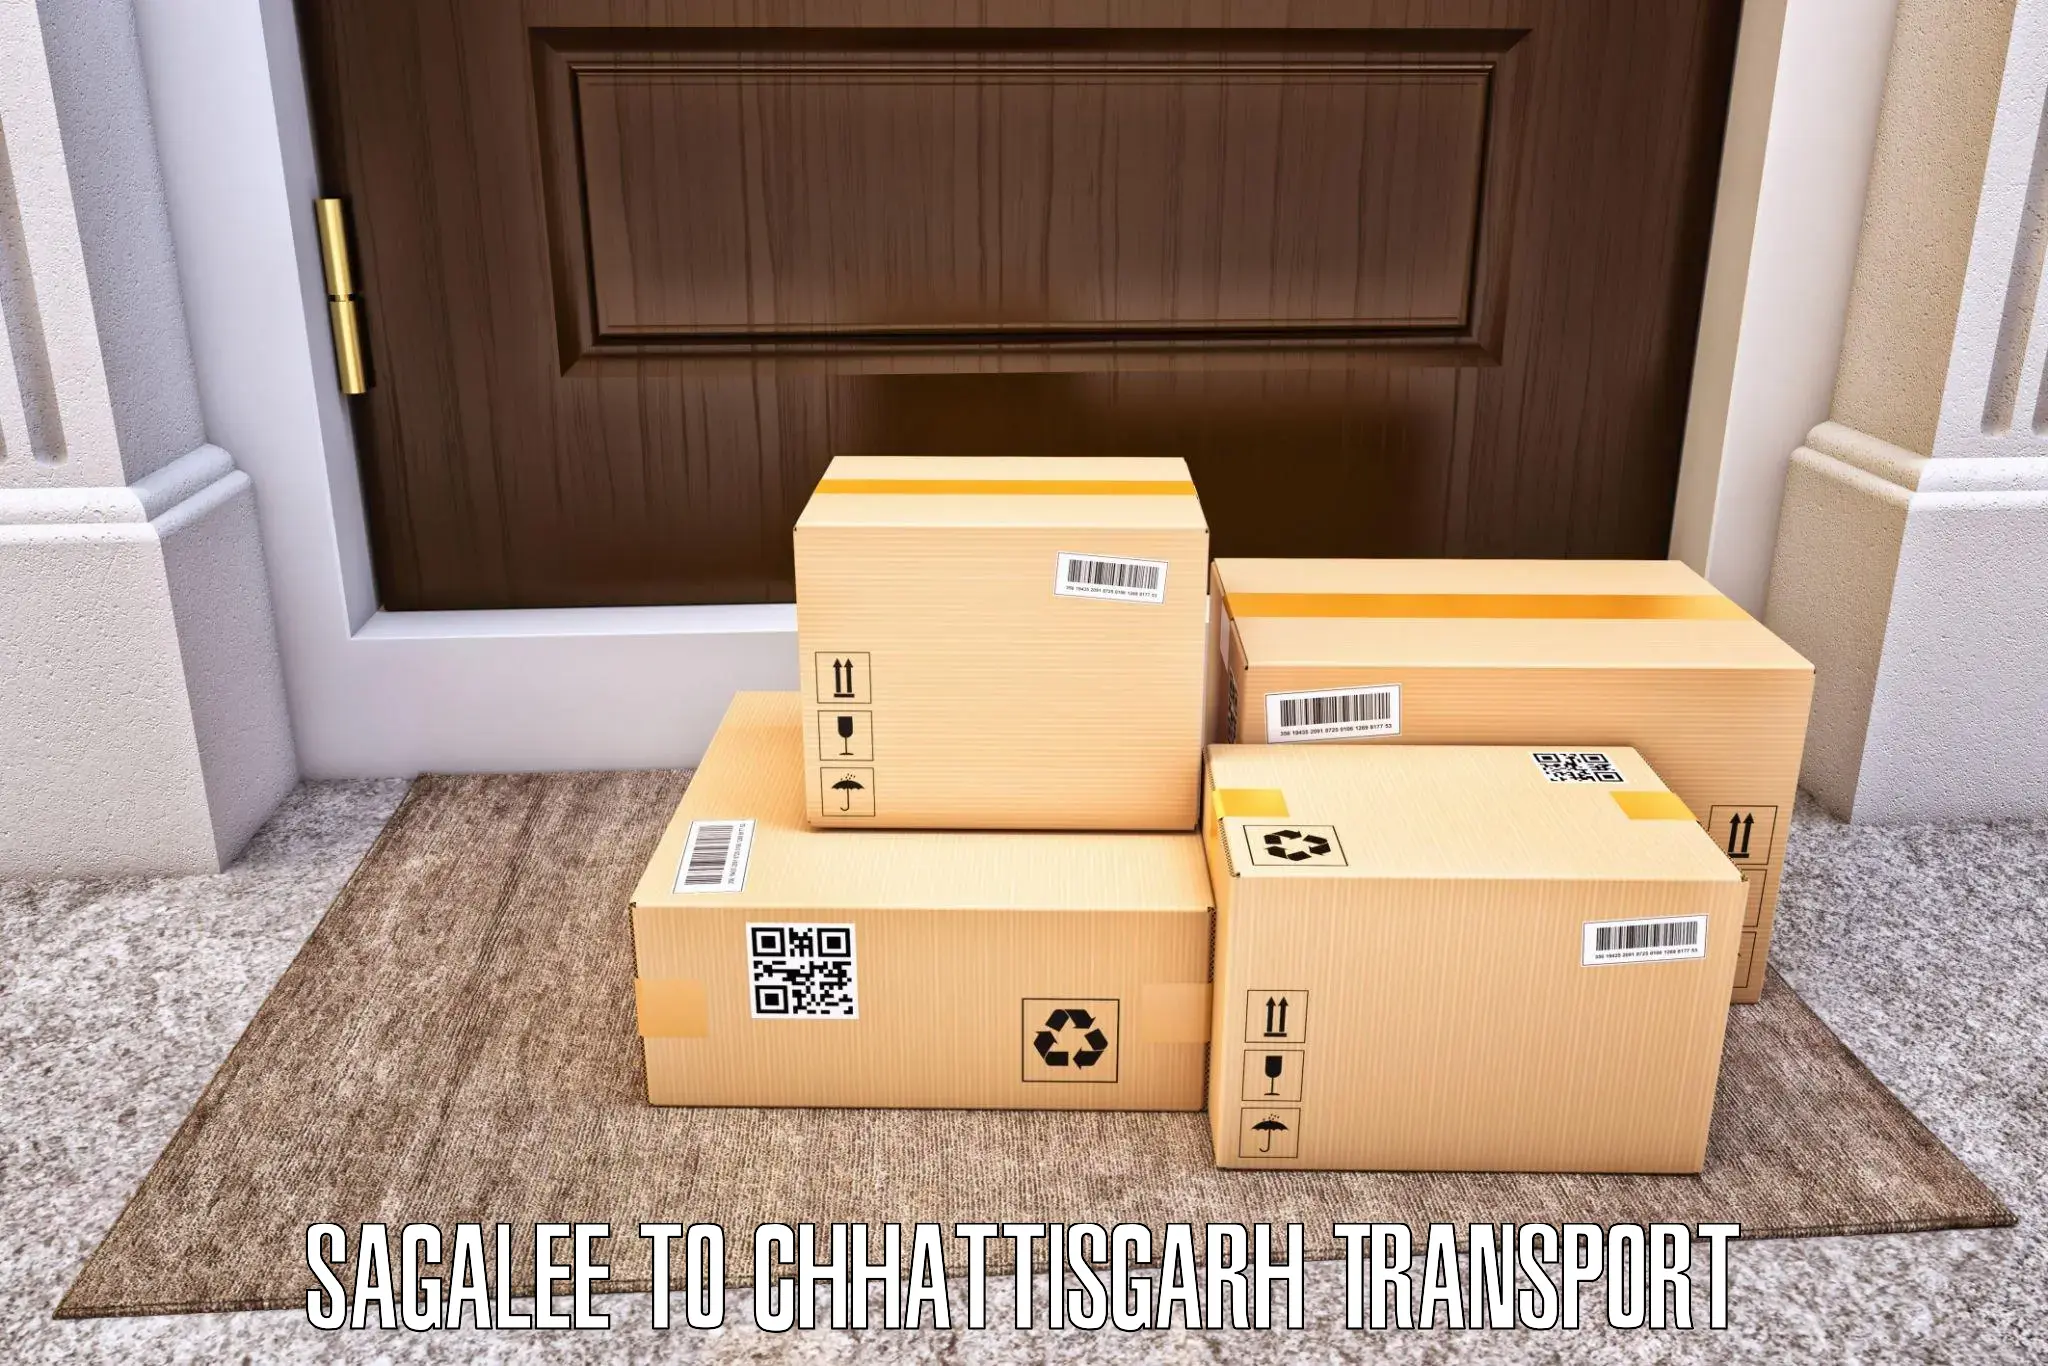 Daily transport service in Sagalee to Kharsia